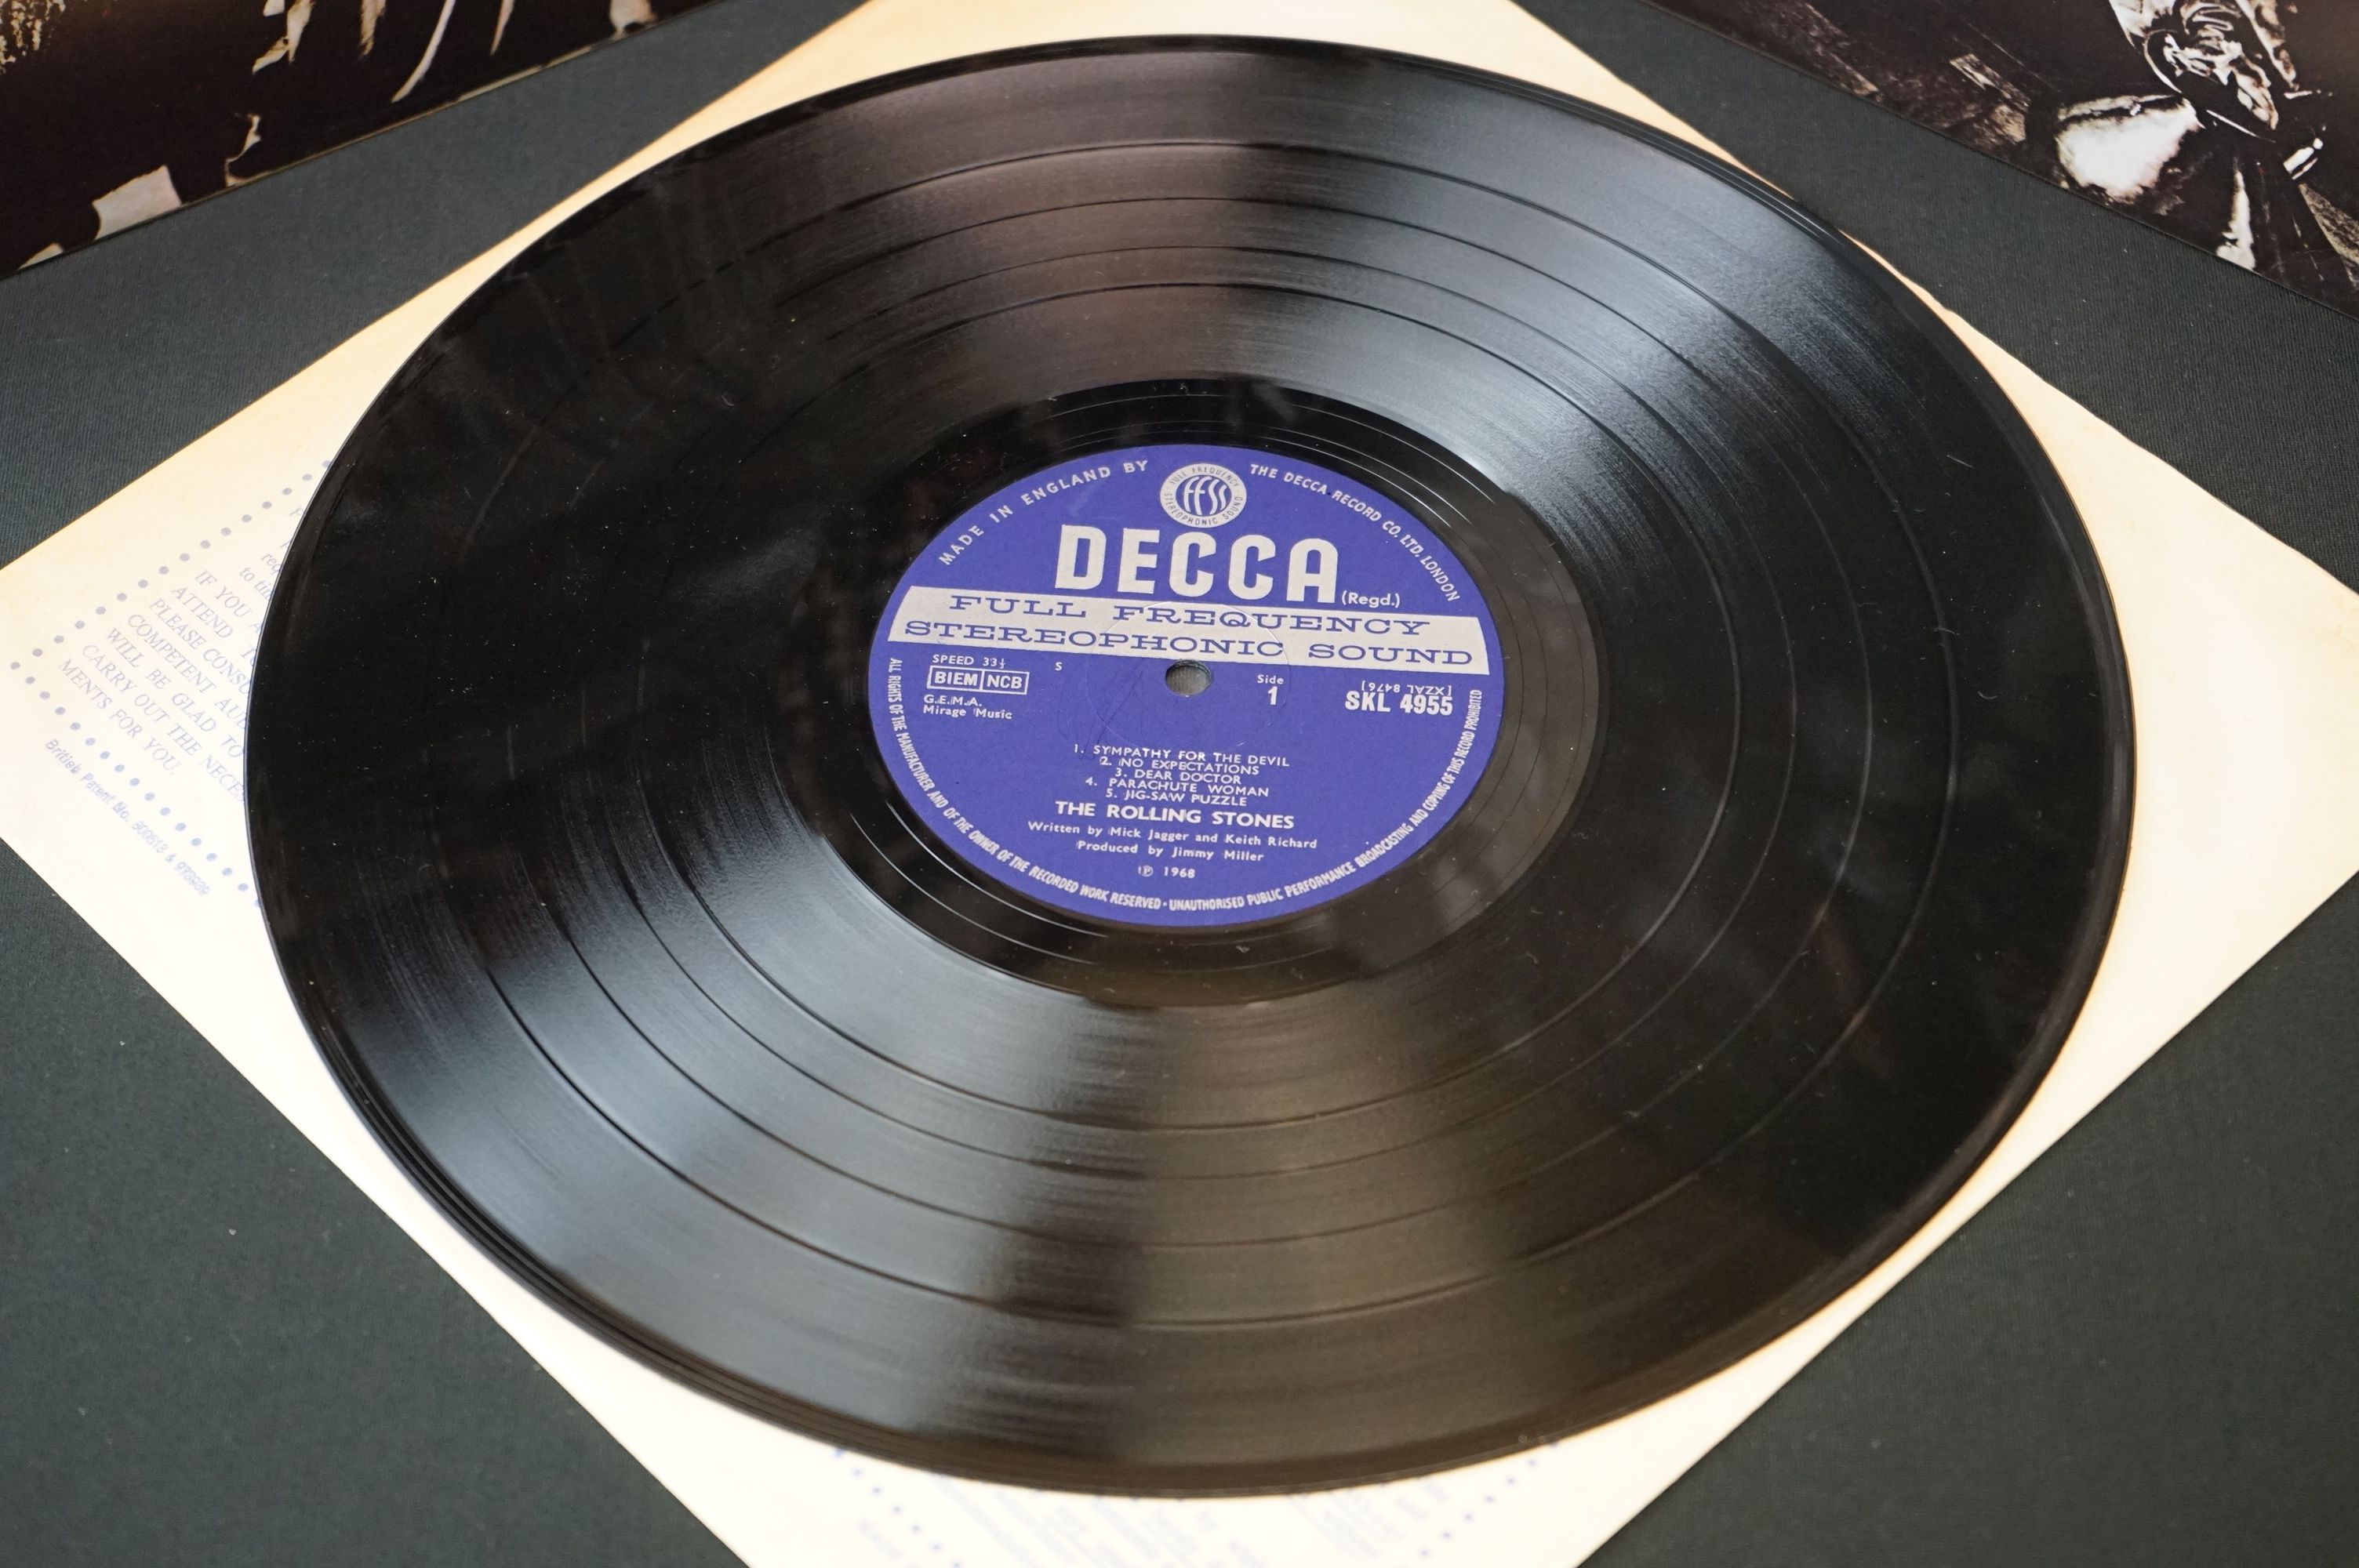 Vinyl - The Rolling Stones Beggars Banquet. Original UK 1st pressing Stereo copy with unboxed - Image 3 of 5